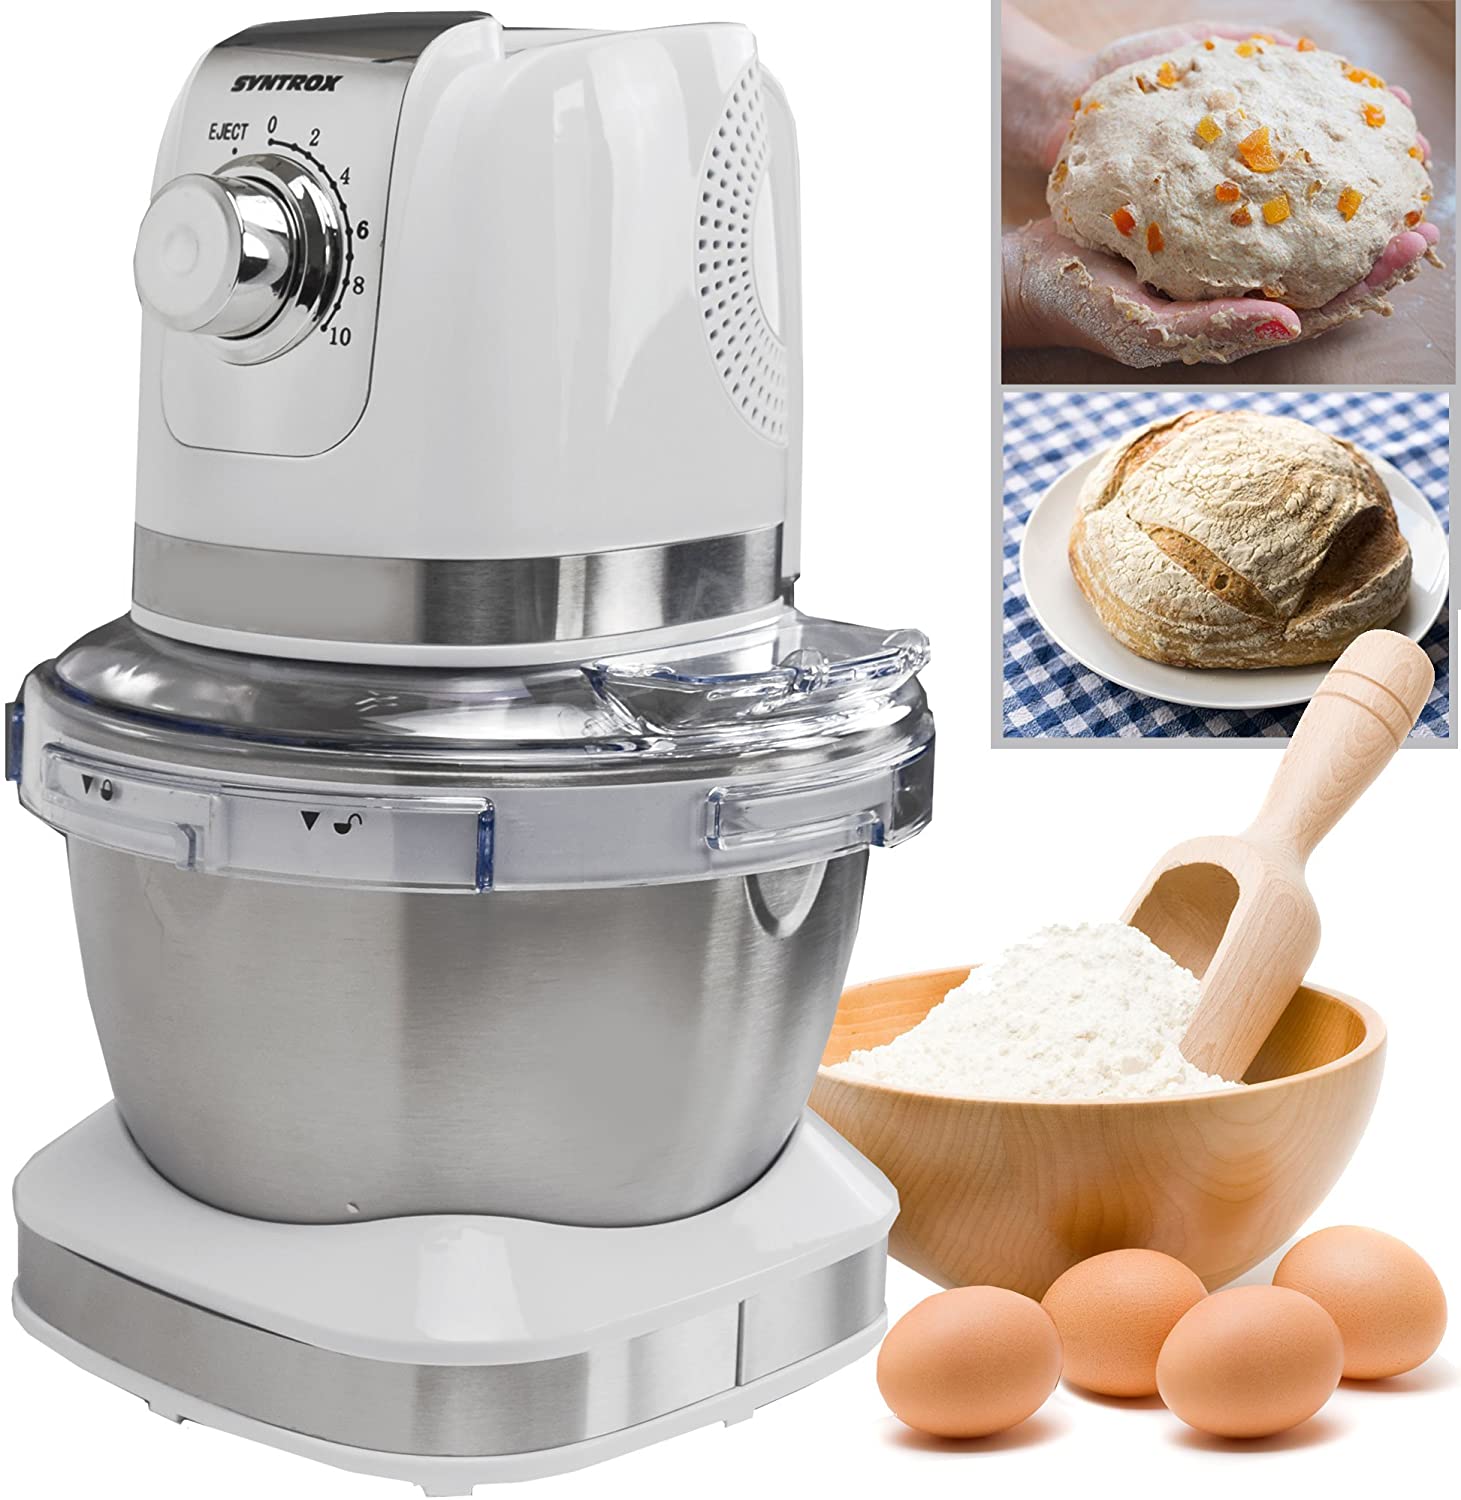 Syntrox Germany KM-600W Food Processor Kneading Machine Mixer, Stainless Steel Container, 4 Litres, Cream